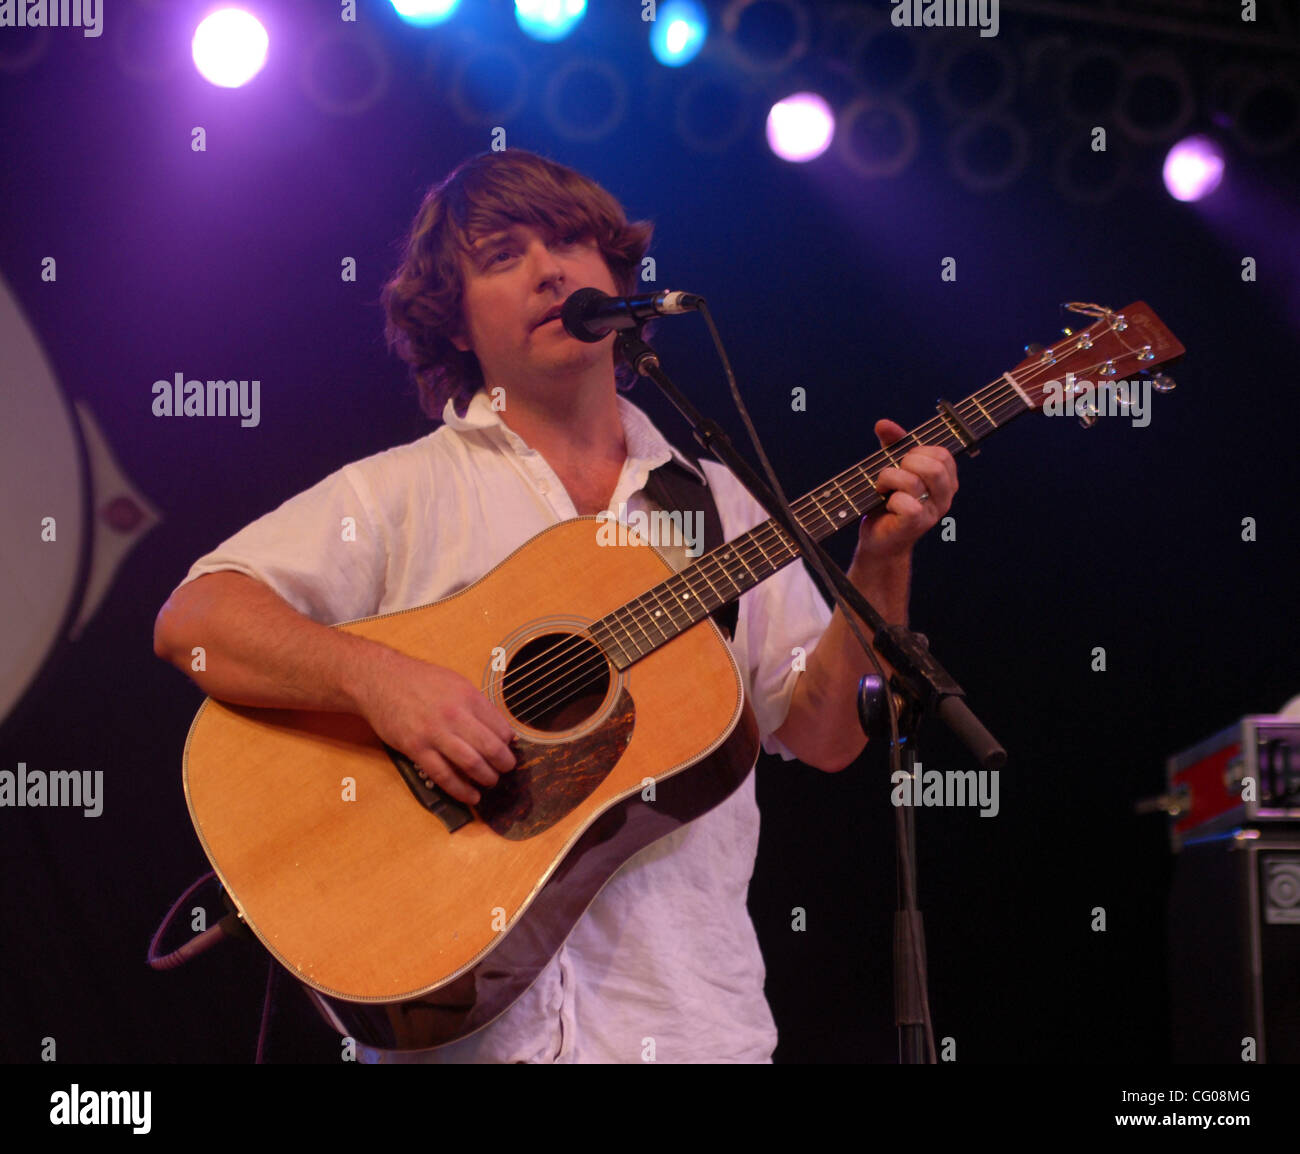 Jun 16, 2007 Manchester, TN; USA, Musician KELLER WILLIAMS performs live as part of the 2007 Bonnaroo Music and Arts Festival that took place in Manchester. Copyright 2007 Jason Moore. Mandatory Credit: Jason Moore Stock Photo